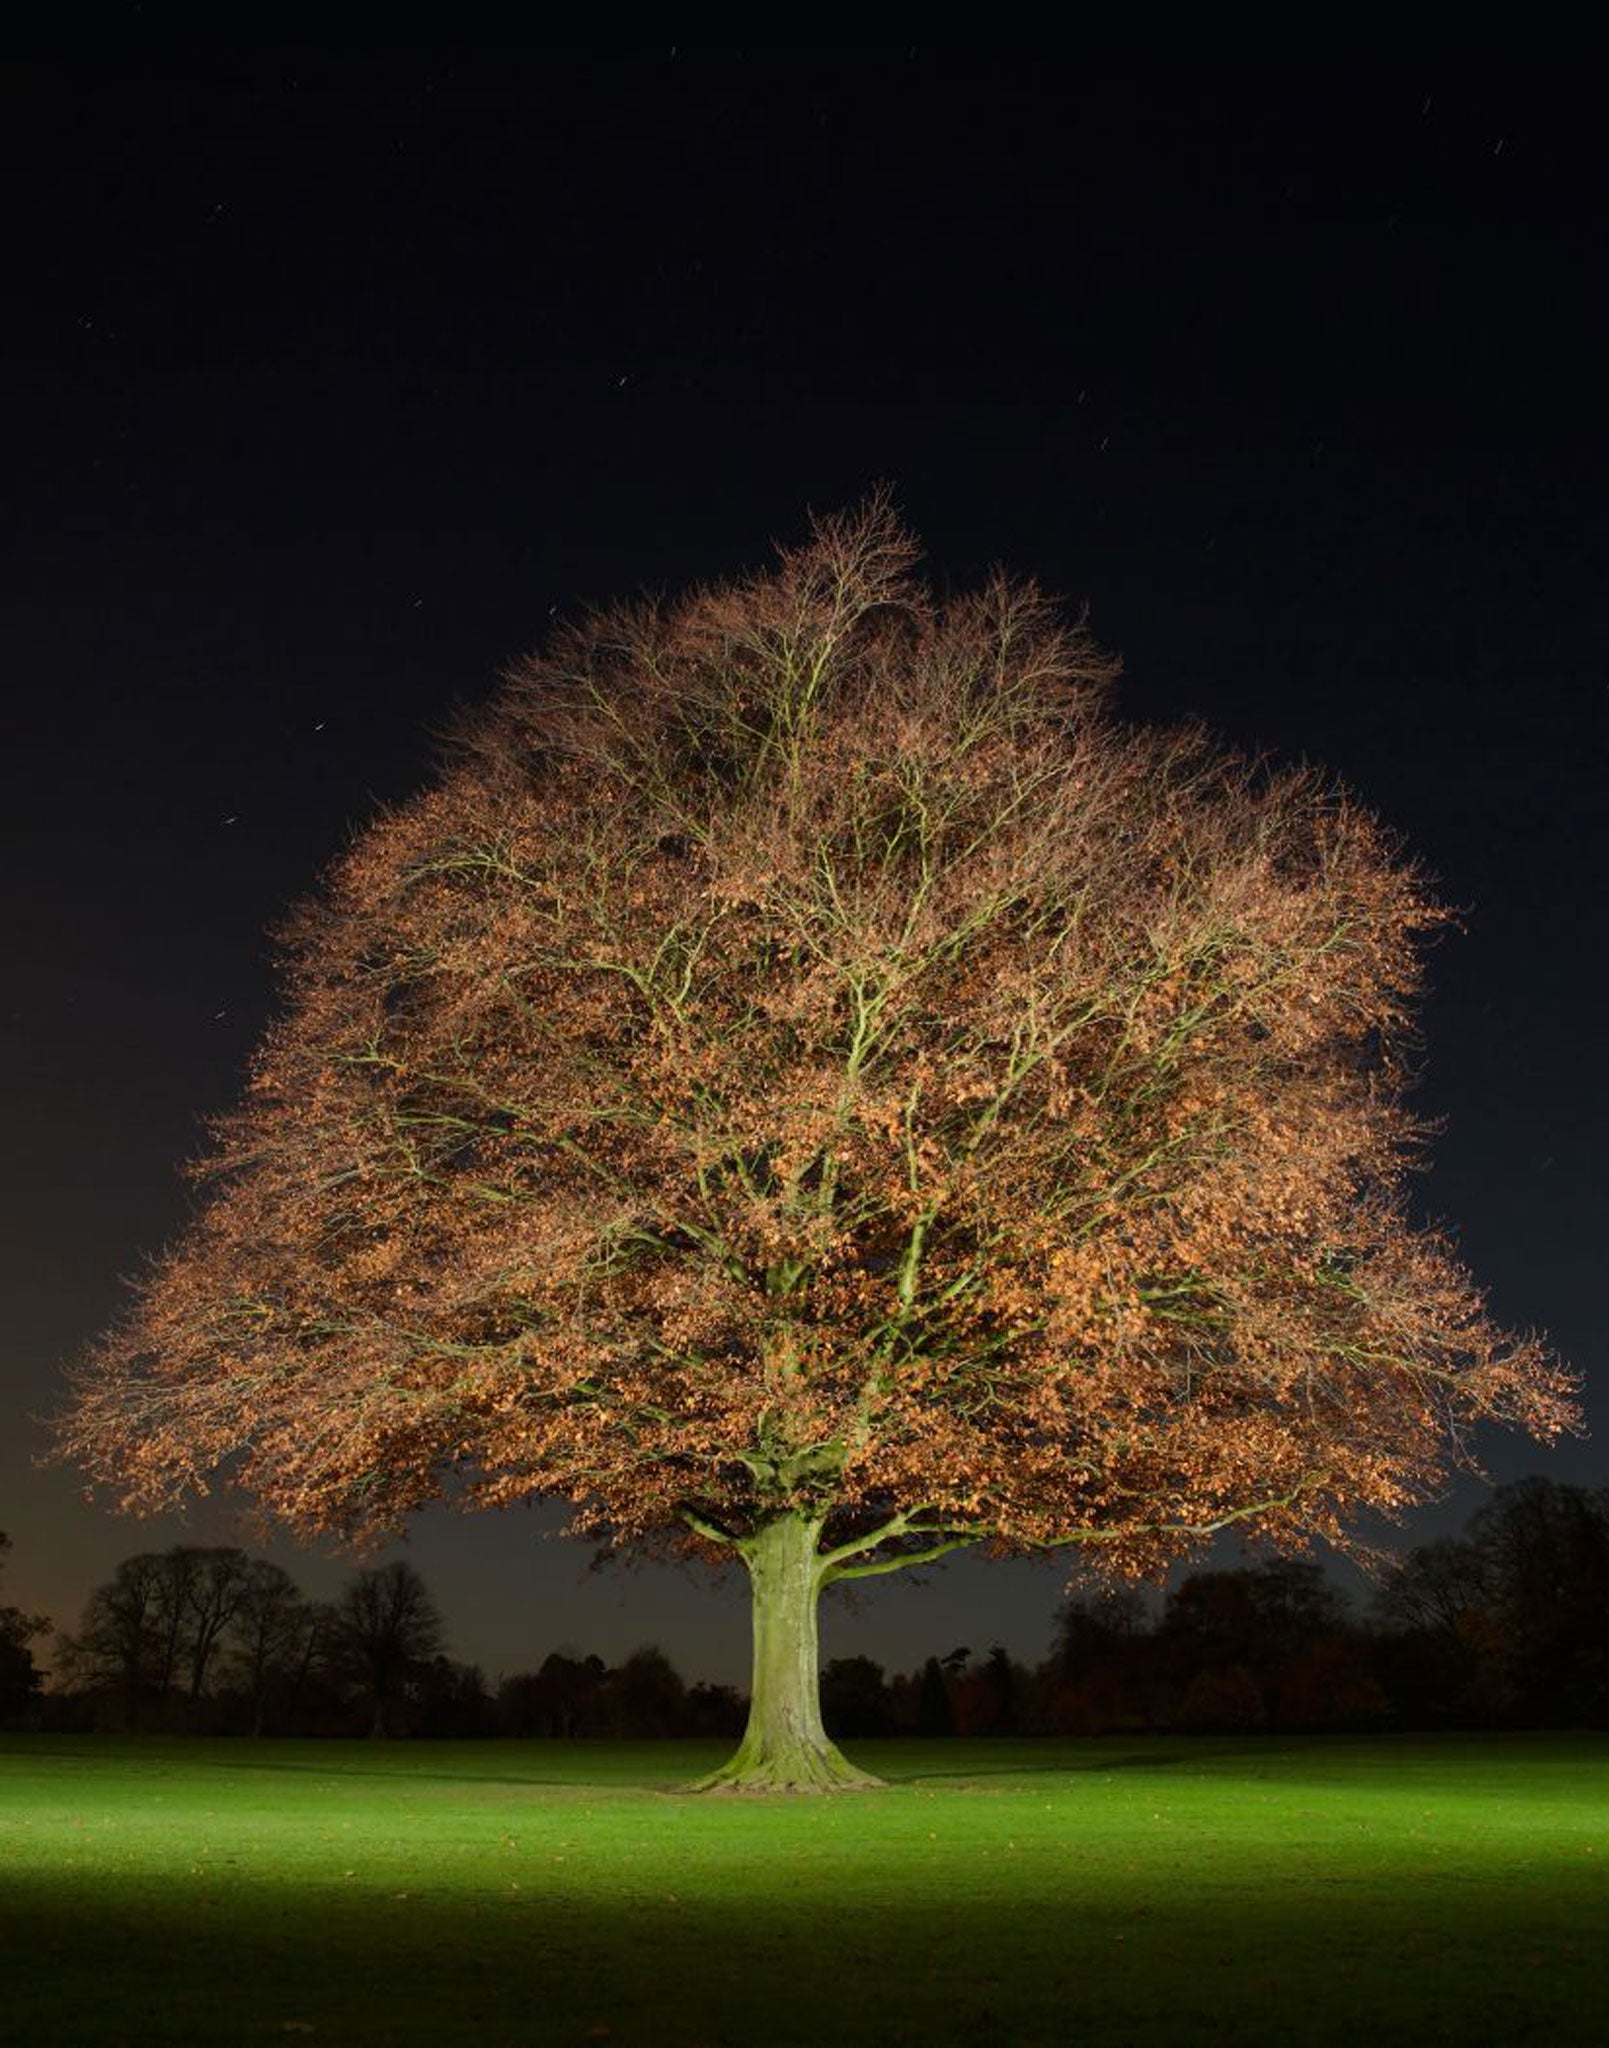 A copper beech tree - part of Jean-Luc Brouard's series of night-time tree portraits, 'Nocturnal Arboreal'